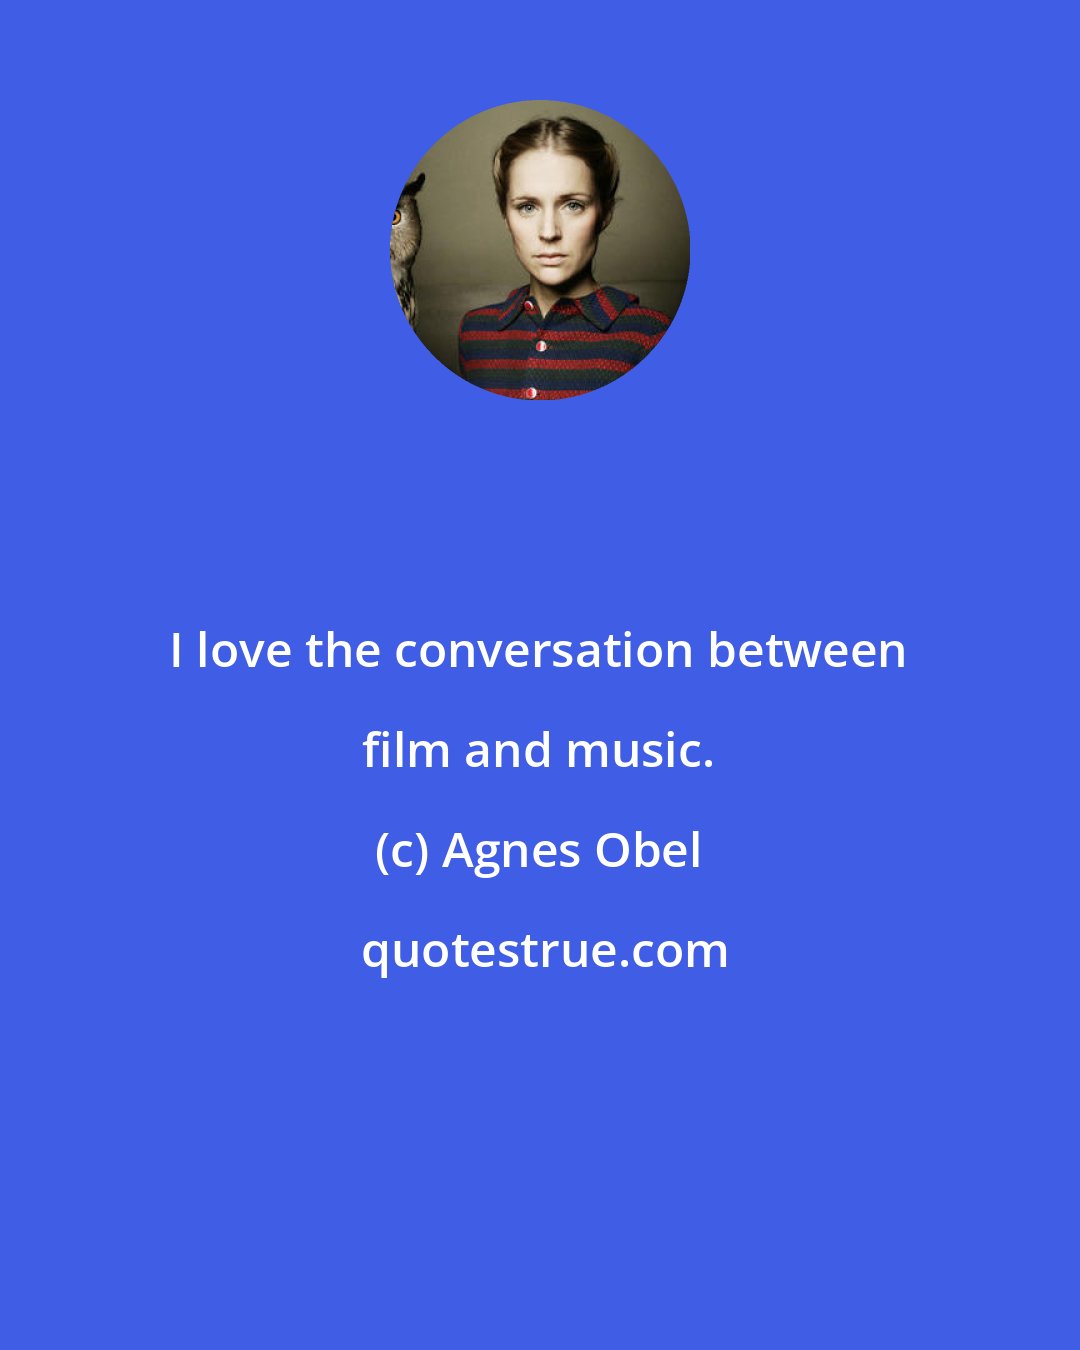 Agnes Obel: I love the conversation between film and music.